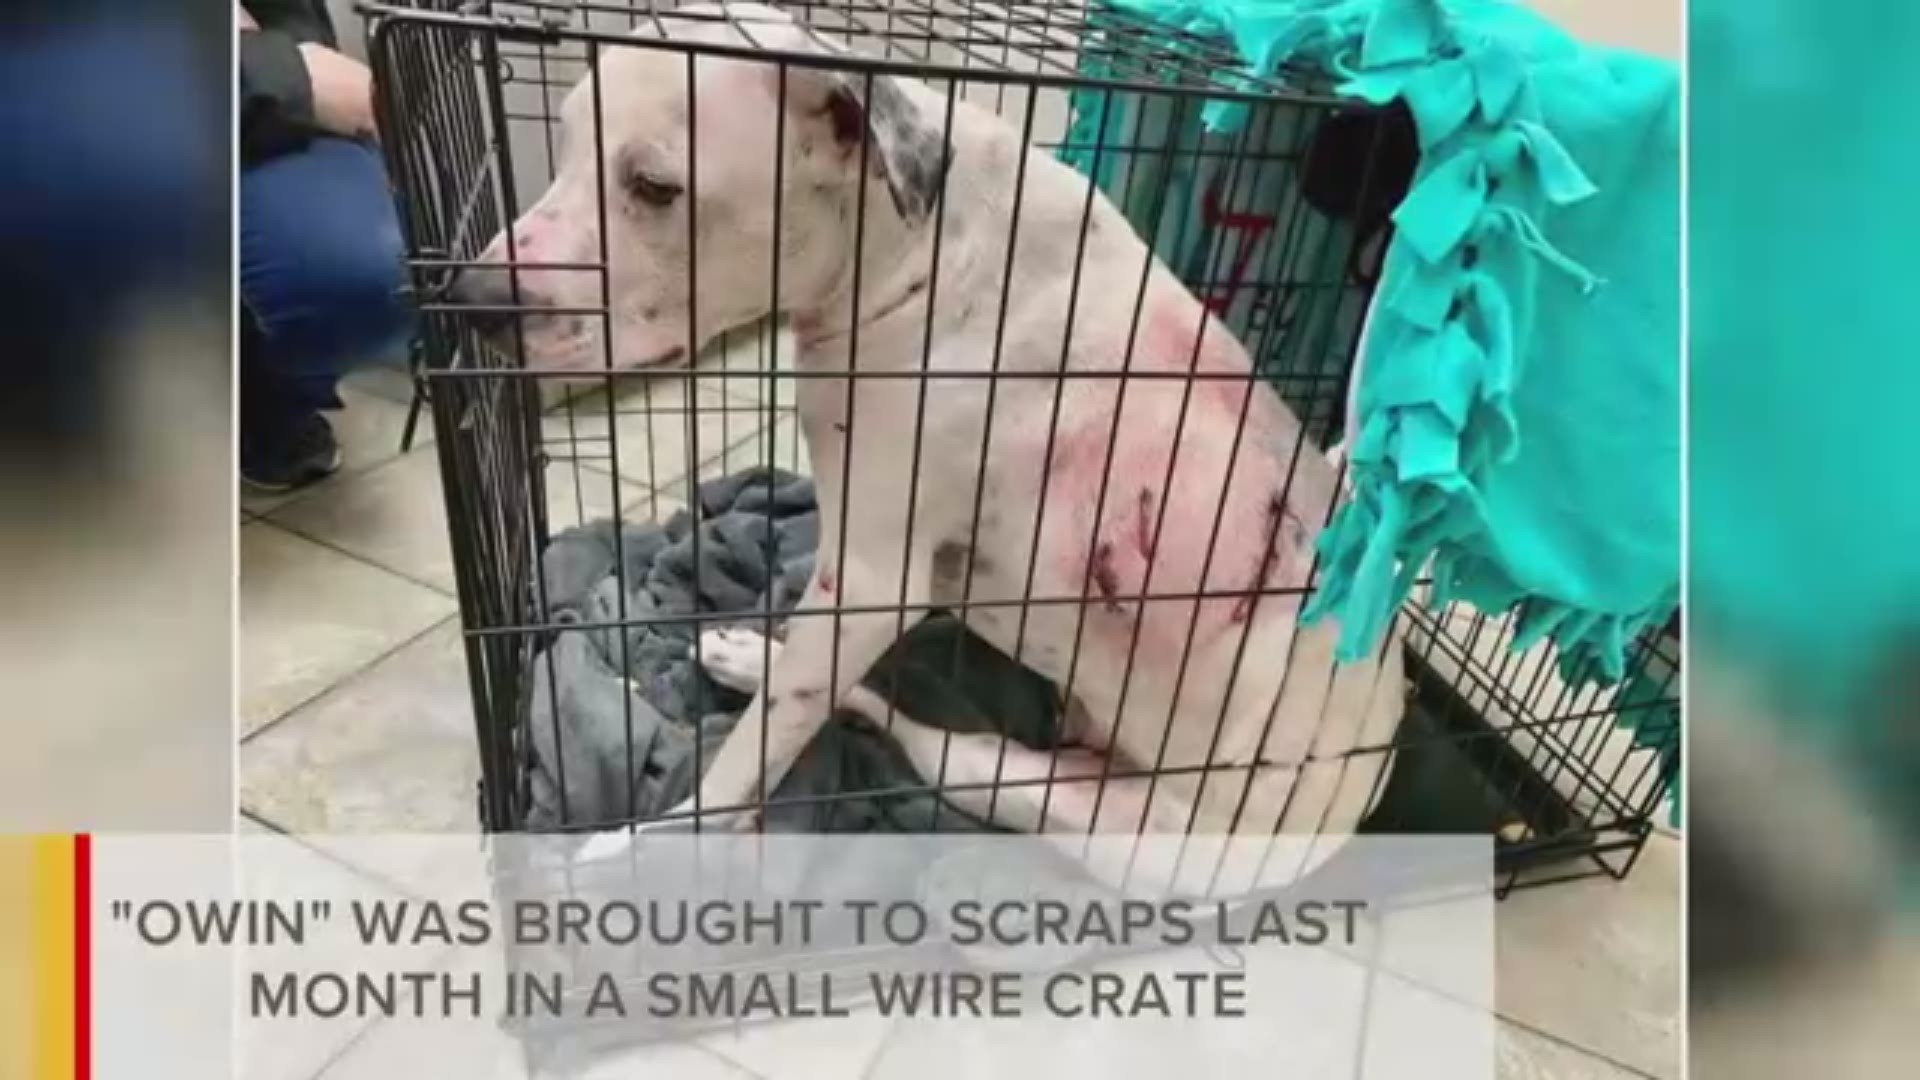 SCRAPS staff said Owin was found sitting beside a pocket knife in his cage and did not want to let anyone near him when he was found.